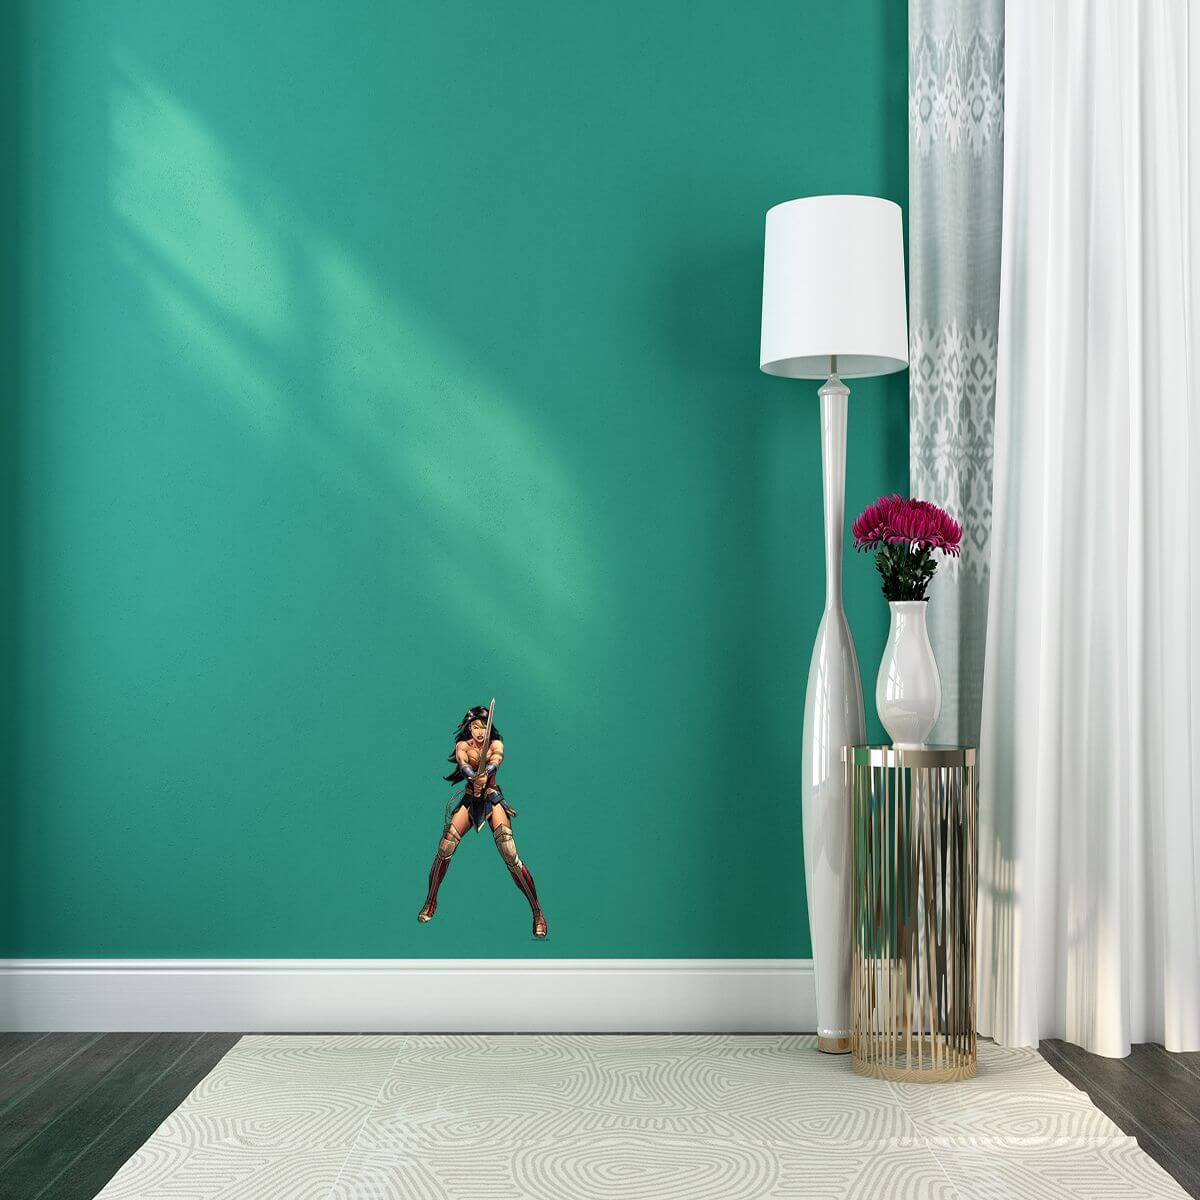 Kismet Decals Wonder Woman Fearless Licensed Wall Sticker - Easy DIY Justice League Home & Room Decor Wall Art - Kismet Decals